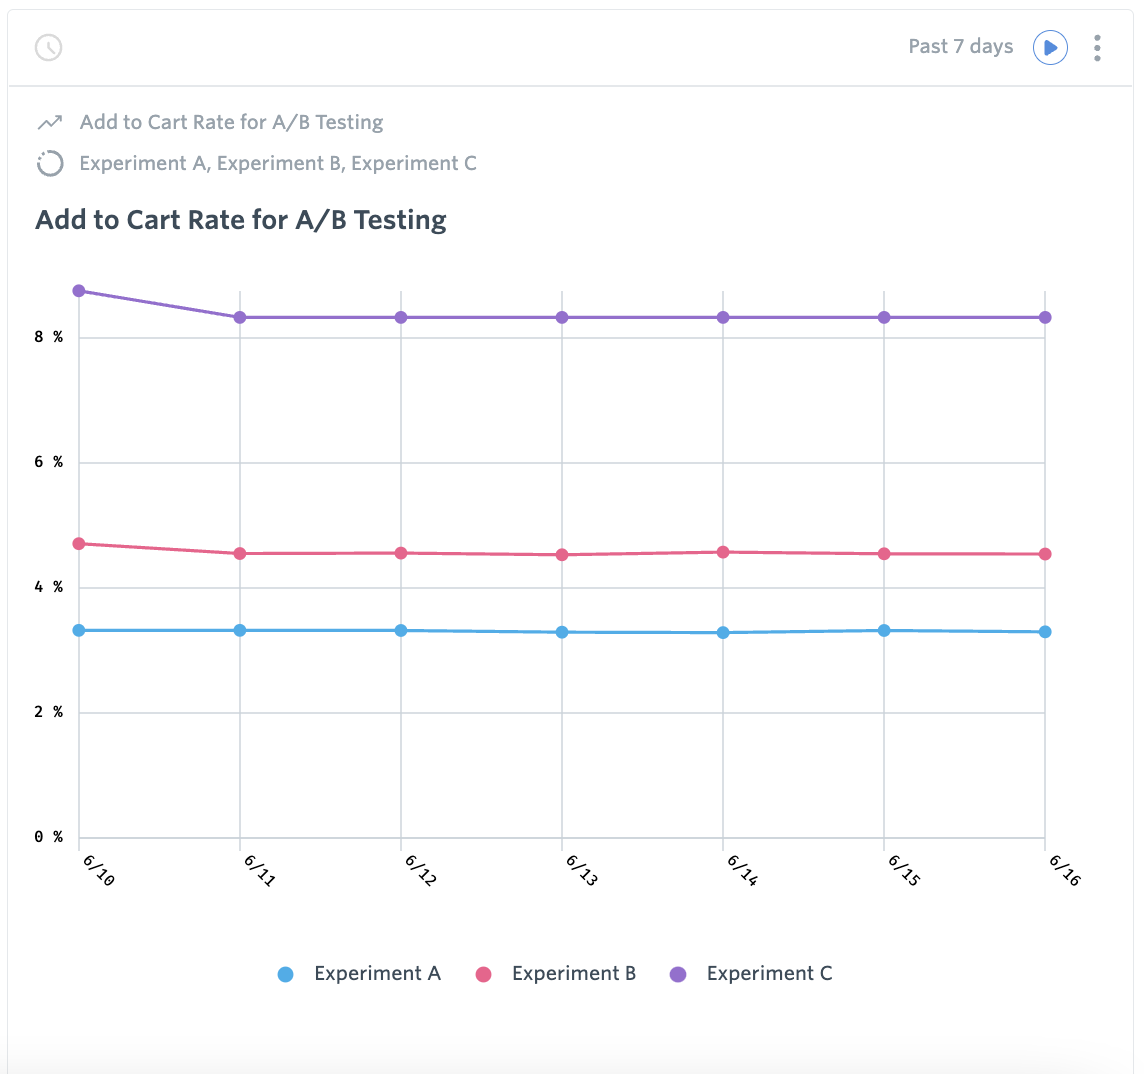 Add to Cart Rate for A/B Testing